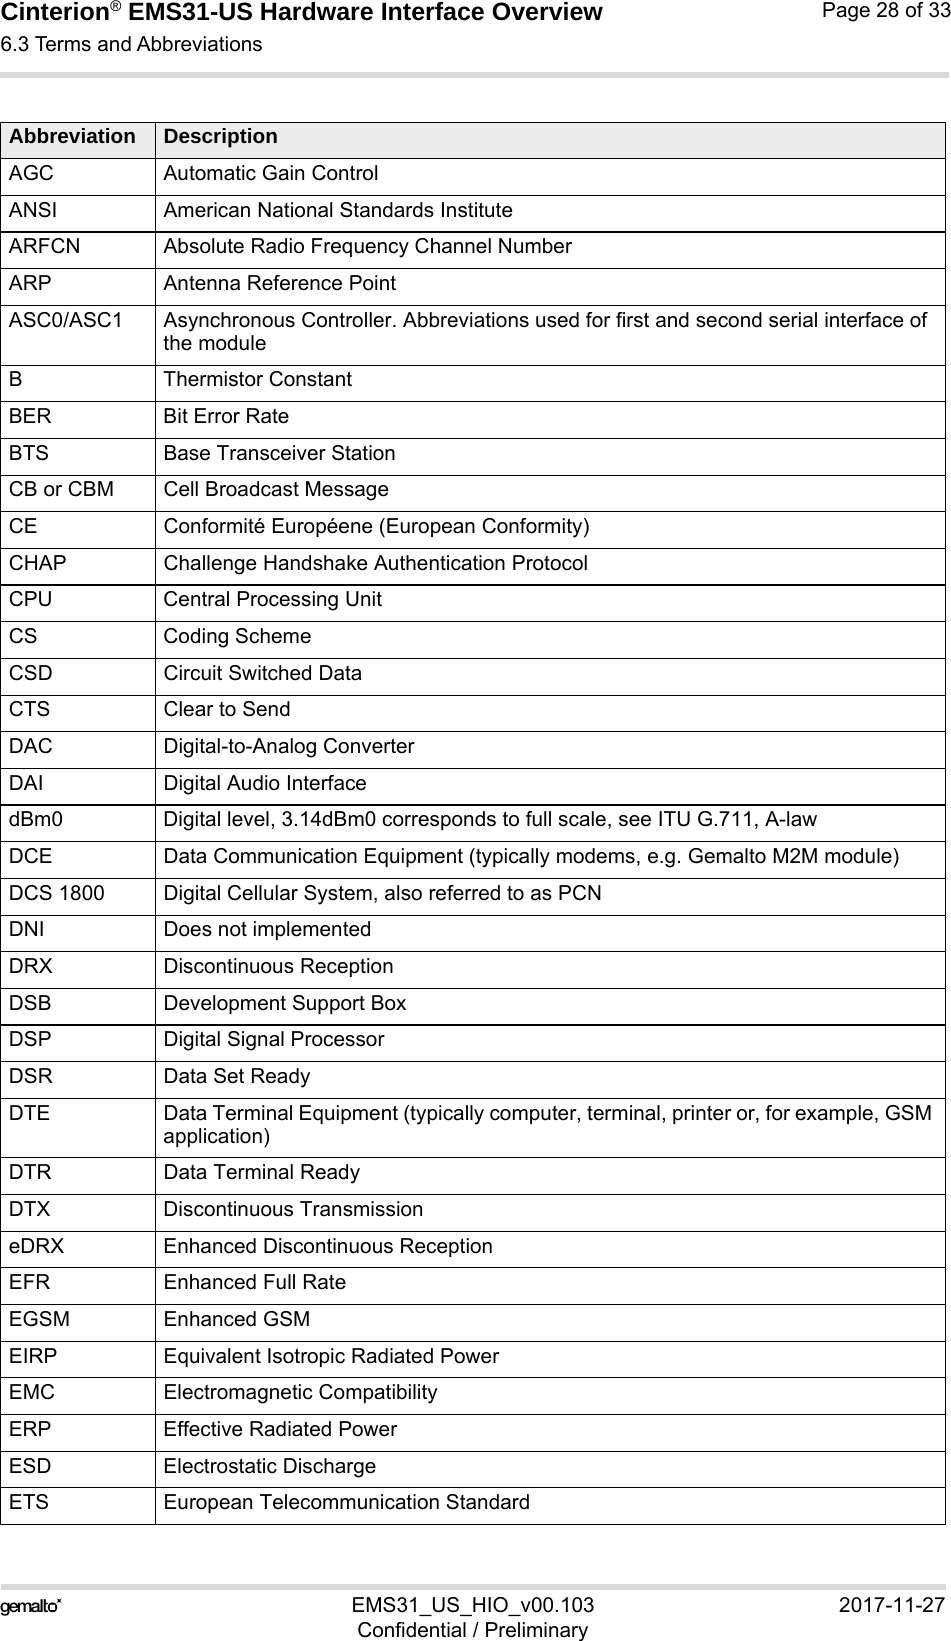 Cinterion® EMS31-US Hardware Interface Overview6.3 Terms and Abbreviations31EMS31_US_HIO_v00.103 2017-11-27Confidential / PreliminaryPage 28 of 33AGC Automatic Gain ControlANSI American National Standards InstituteARFCN Absolute Radio Frequency Channel NumberARP Antenna Reference PointASC0/ASC1 Asynchronous Controller. Abbreviations used for first and second serial interface of the moduleB Thermistor ConstantBER Bit Error RateBTS Base Transceiver StationCB or CBM Cell Broadcast MessageCE Conformité Européene (European Conformity)CHAP Challenge Handshake Authentication ProtocolCPU Central Processing UnitCS Coding SchemeCSD Circuit Switched DataCTS Clear to SendDAC Digital-to-Analog ConverterDAI Digital Audio InterfacedBm0 Digital level, 3.14dBm0 corresponds to full scale, see ITU G.711, A-lawDCE Data Communication Equipment (typically modems, e.g. Gemalto M2M module)DCS 1800 Digital Cellular System, also referred to as PCNDNI Does not implementedDRX Discontinuous ReceptionDSB Development Support BoxDSP Digital Signal ProcessorDSR Data Set ReadyDTE Data Terminal Equipment (typically computer, terminal, printer or, for example, GSM application)DTR Data Terminal ReadyDTX Discontinuous TransmissioneDRX Enhanced Discontinuous ReceptionEFR Enhanced Full RateEGSM Enhanced GSMEIRP Equivalent Isotropic Radiated PowerEMC Electromagnetic CompatibilityERP Effective Radiated PowerESD Electrostatic DischargeETS European Telecommunication StandardAbbreviation Description